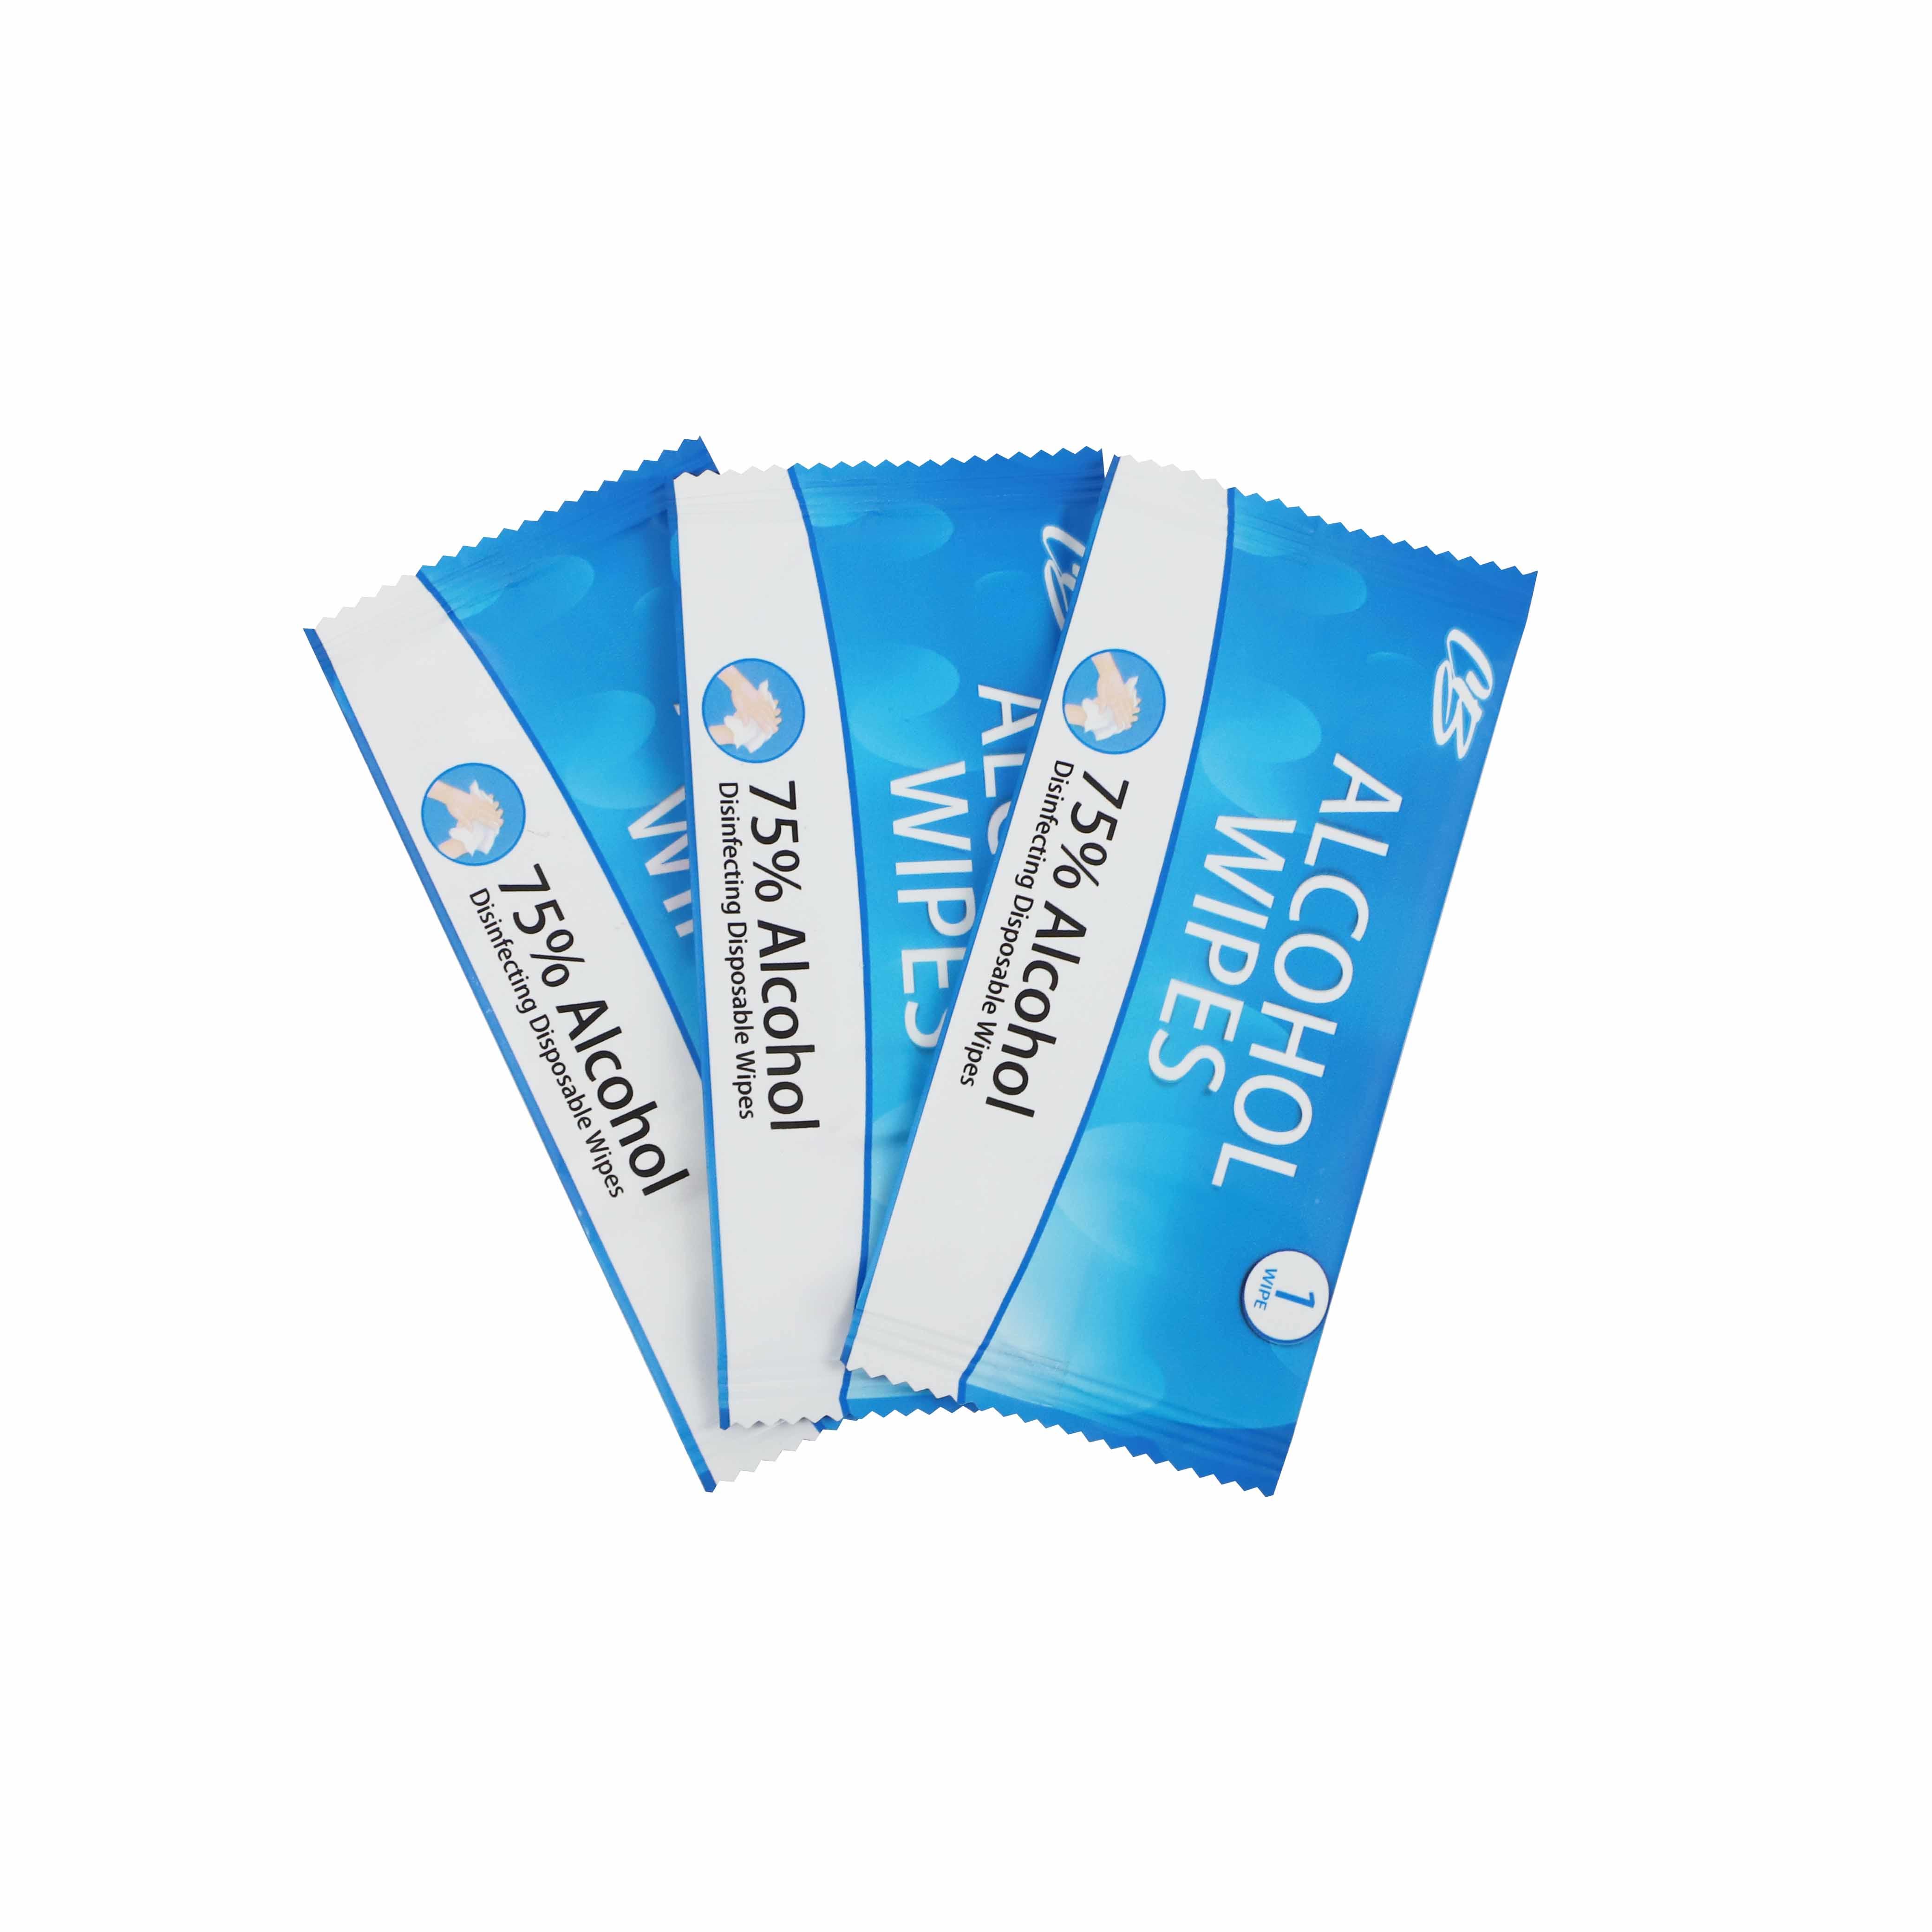 75% Alcohol Wipes manufacturer  Sanitizing Cleaning Wet Wipes with Soft Spunlace Non-Woven